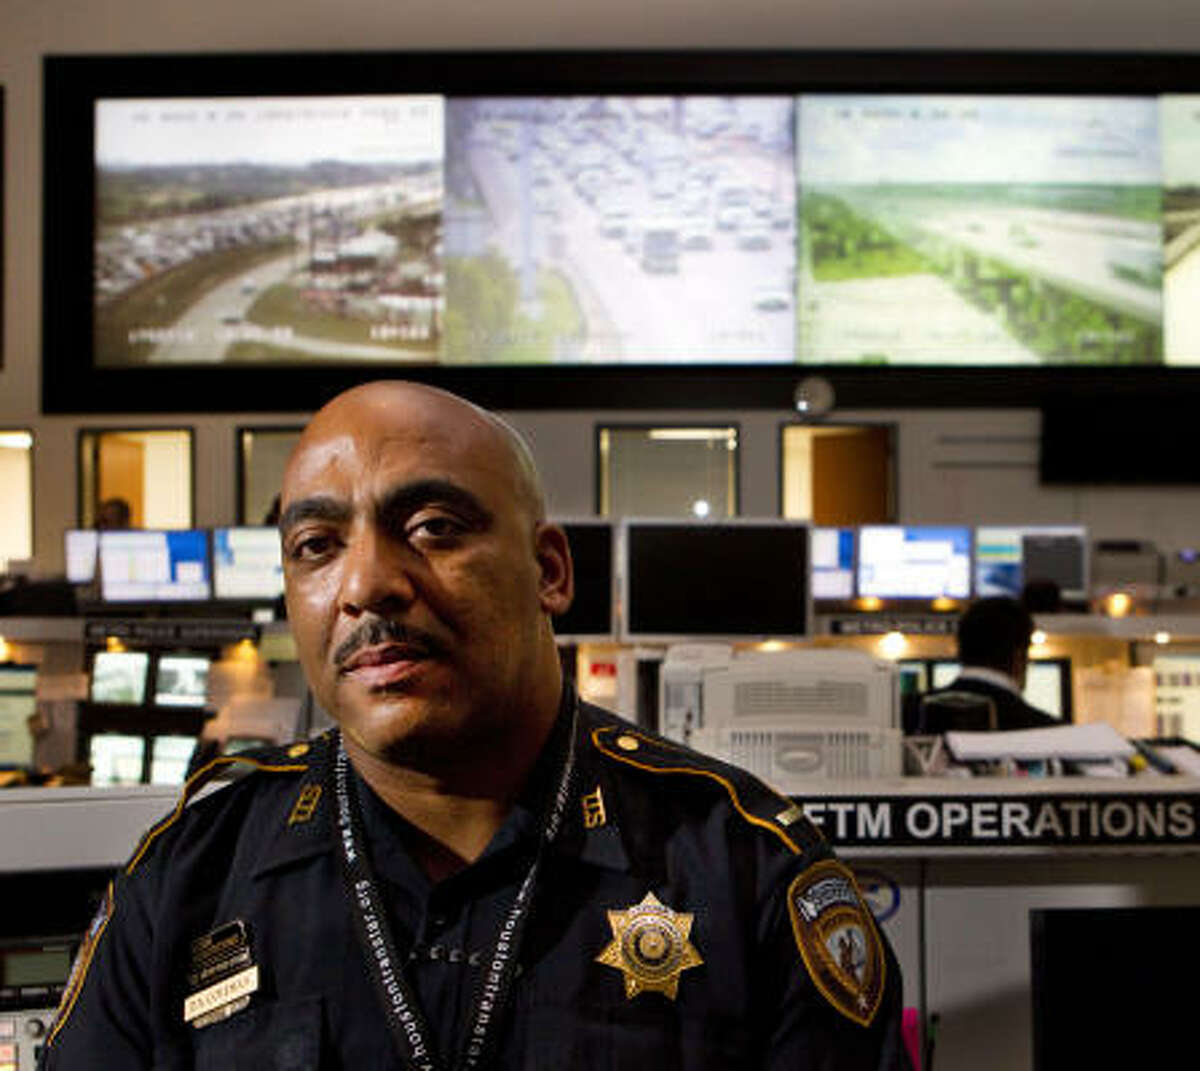 Harris County Sheriff's Deputy Lt. Darryl Coleman has a clear view of Houston-area traffic from his post inside TranStar's nerve center, which has more than 700 cameras in use.